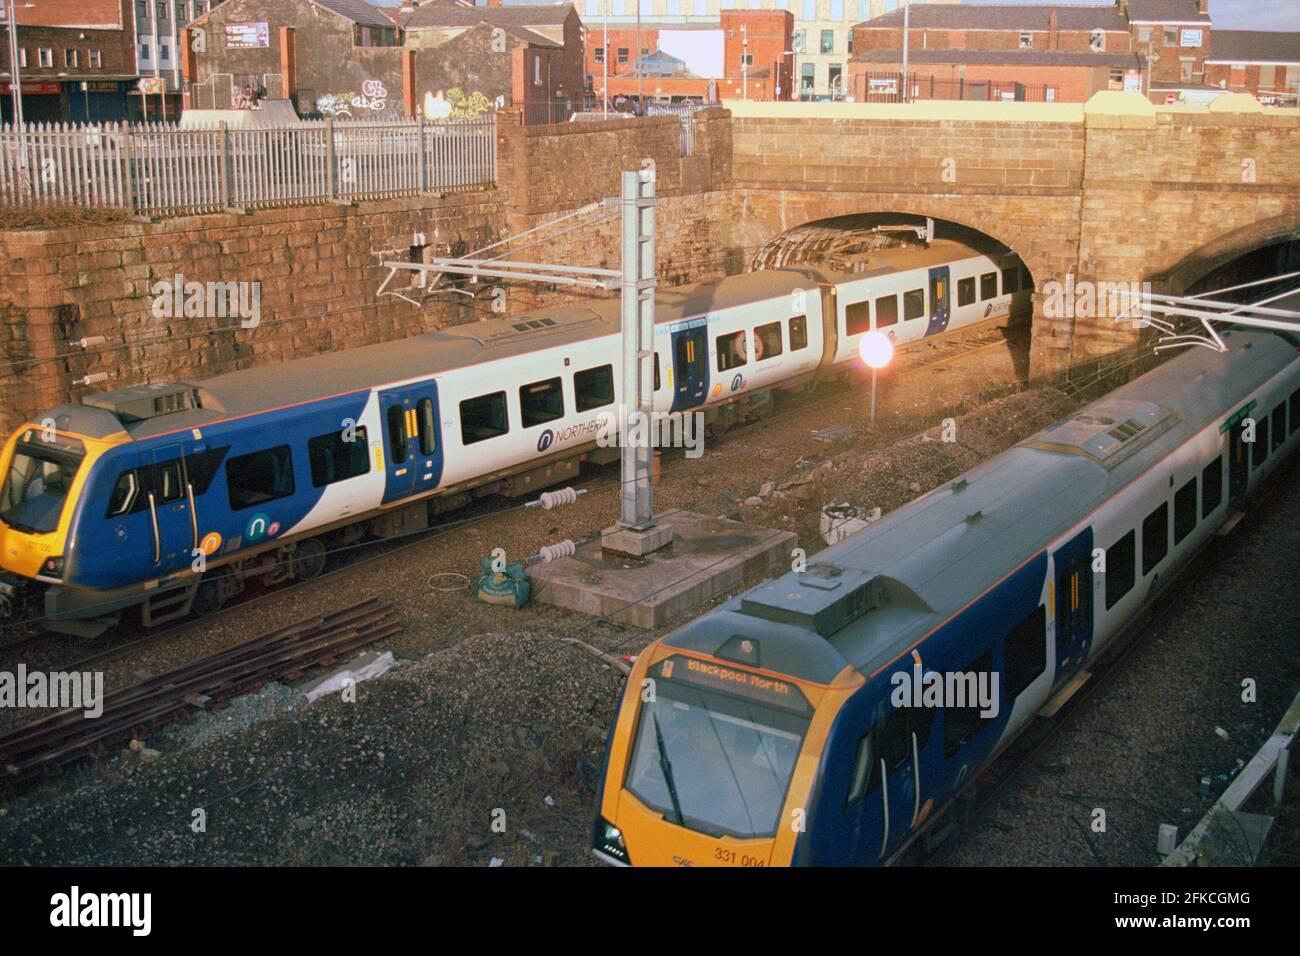 Bolton, UK - March 2021: Northern trains (Class 331) leaving and arriving Bolton station. Stock Photo